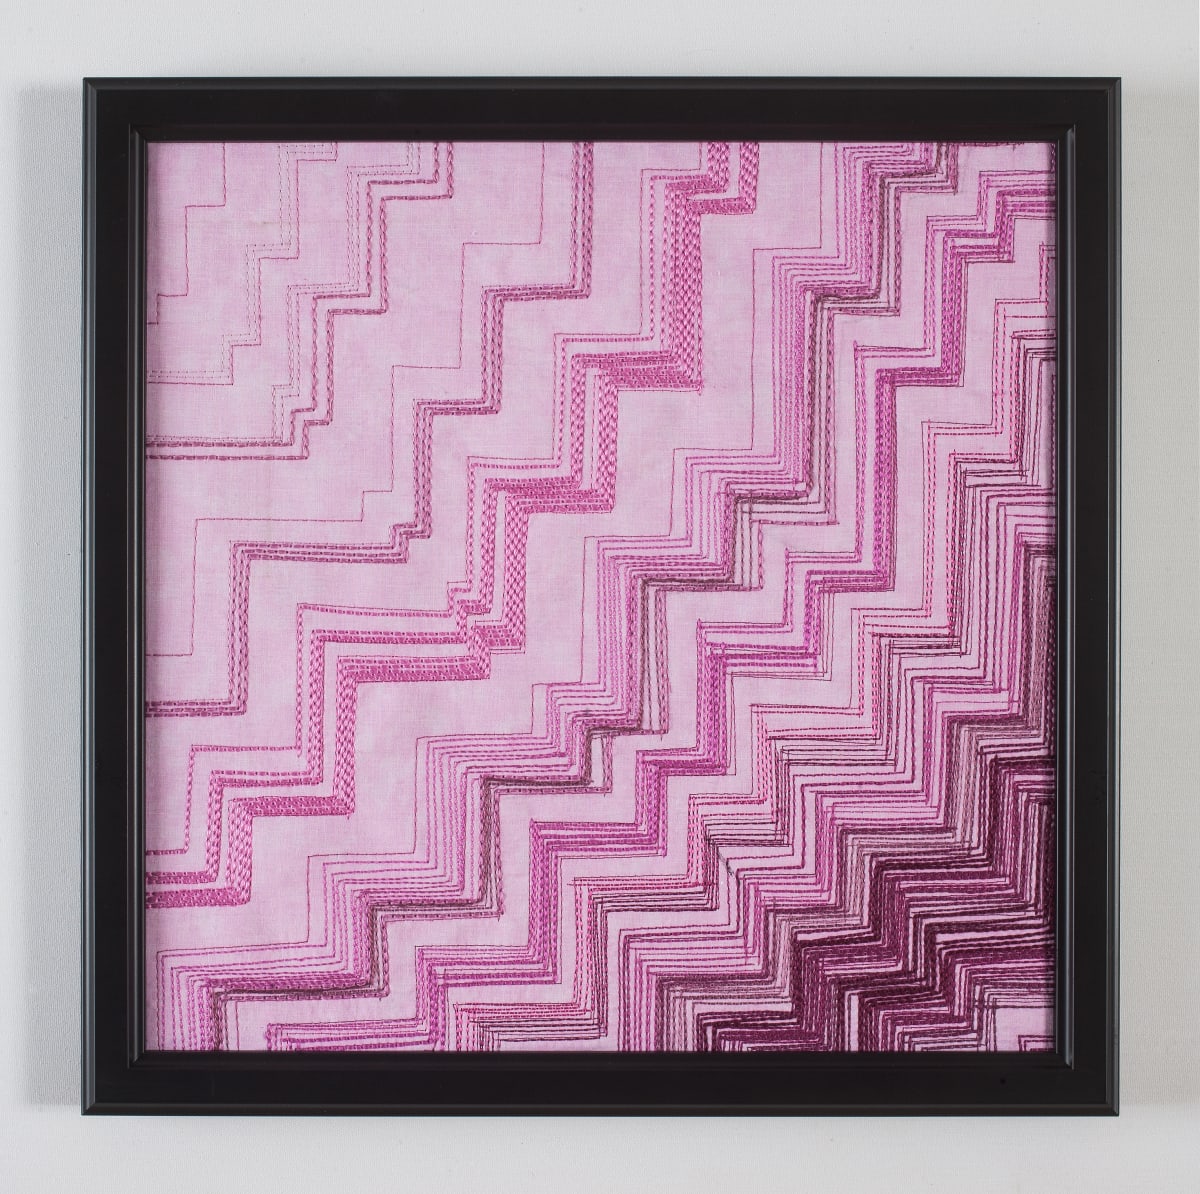 Synesthesia #17 Magenta by Lesley Turner  Image: Lesley Turner, 'Synesthesia #17 Magenta', 2017, 13"x13'x0.5". Cotton and Tencel fabrics, cotton and polyester threads. Working monochromatically I focused on expressing the color’s radiating energy through line and value. Photo: Tony Bounsall Photo-Design